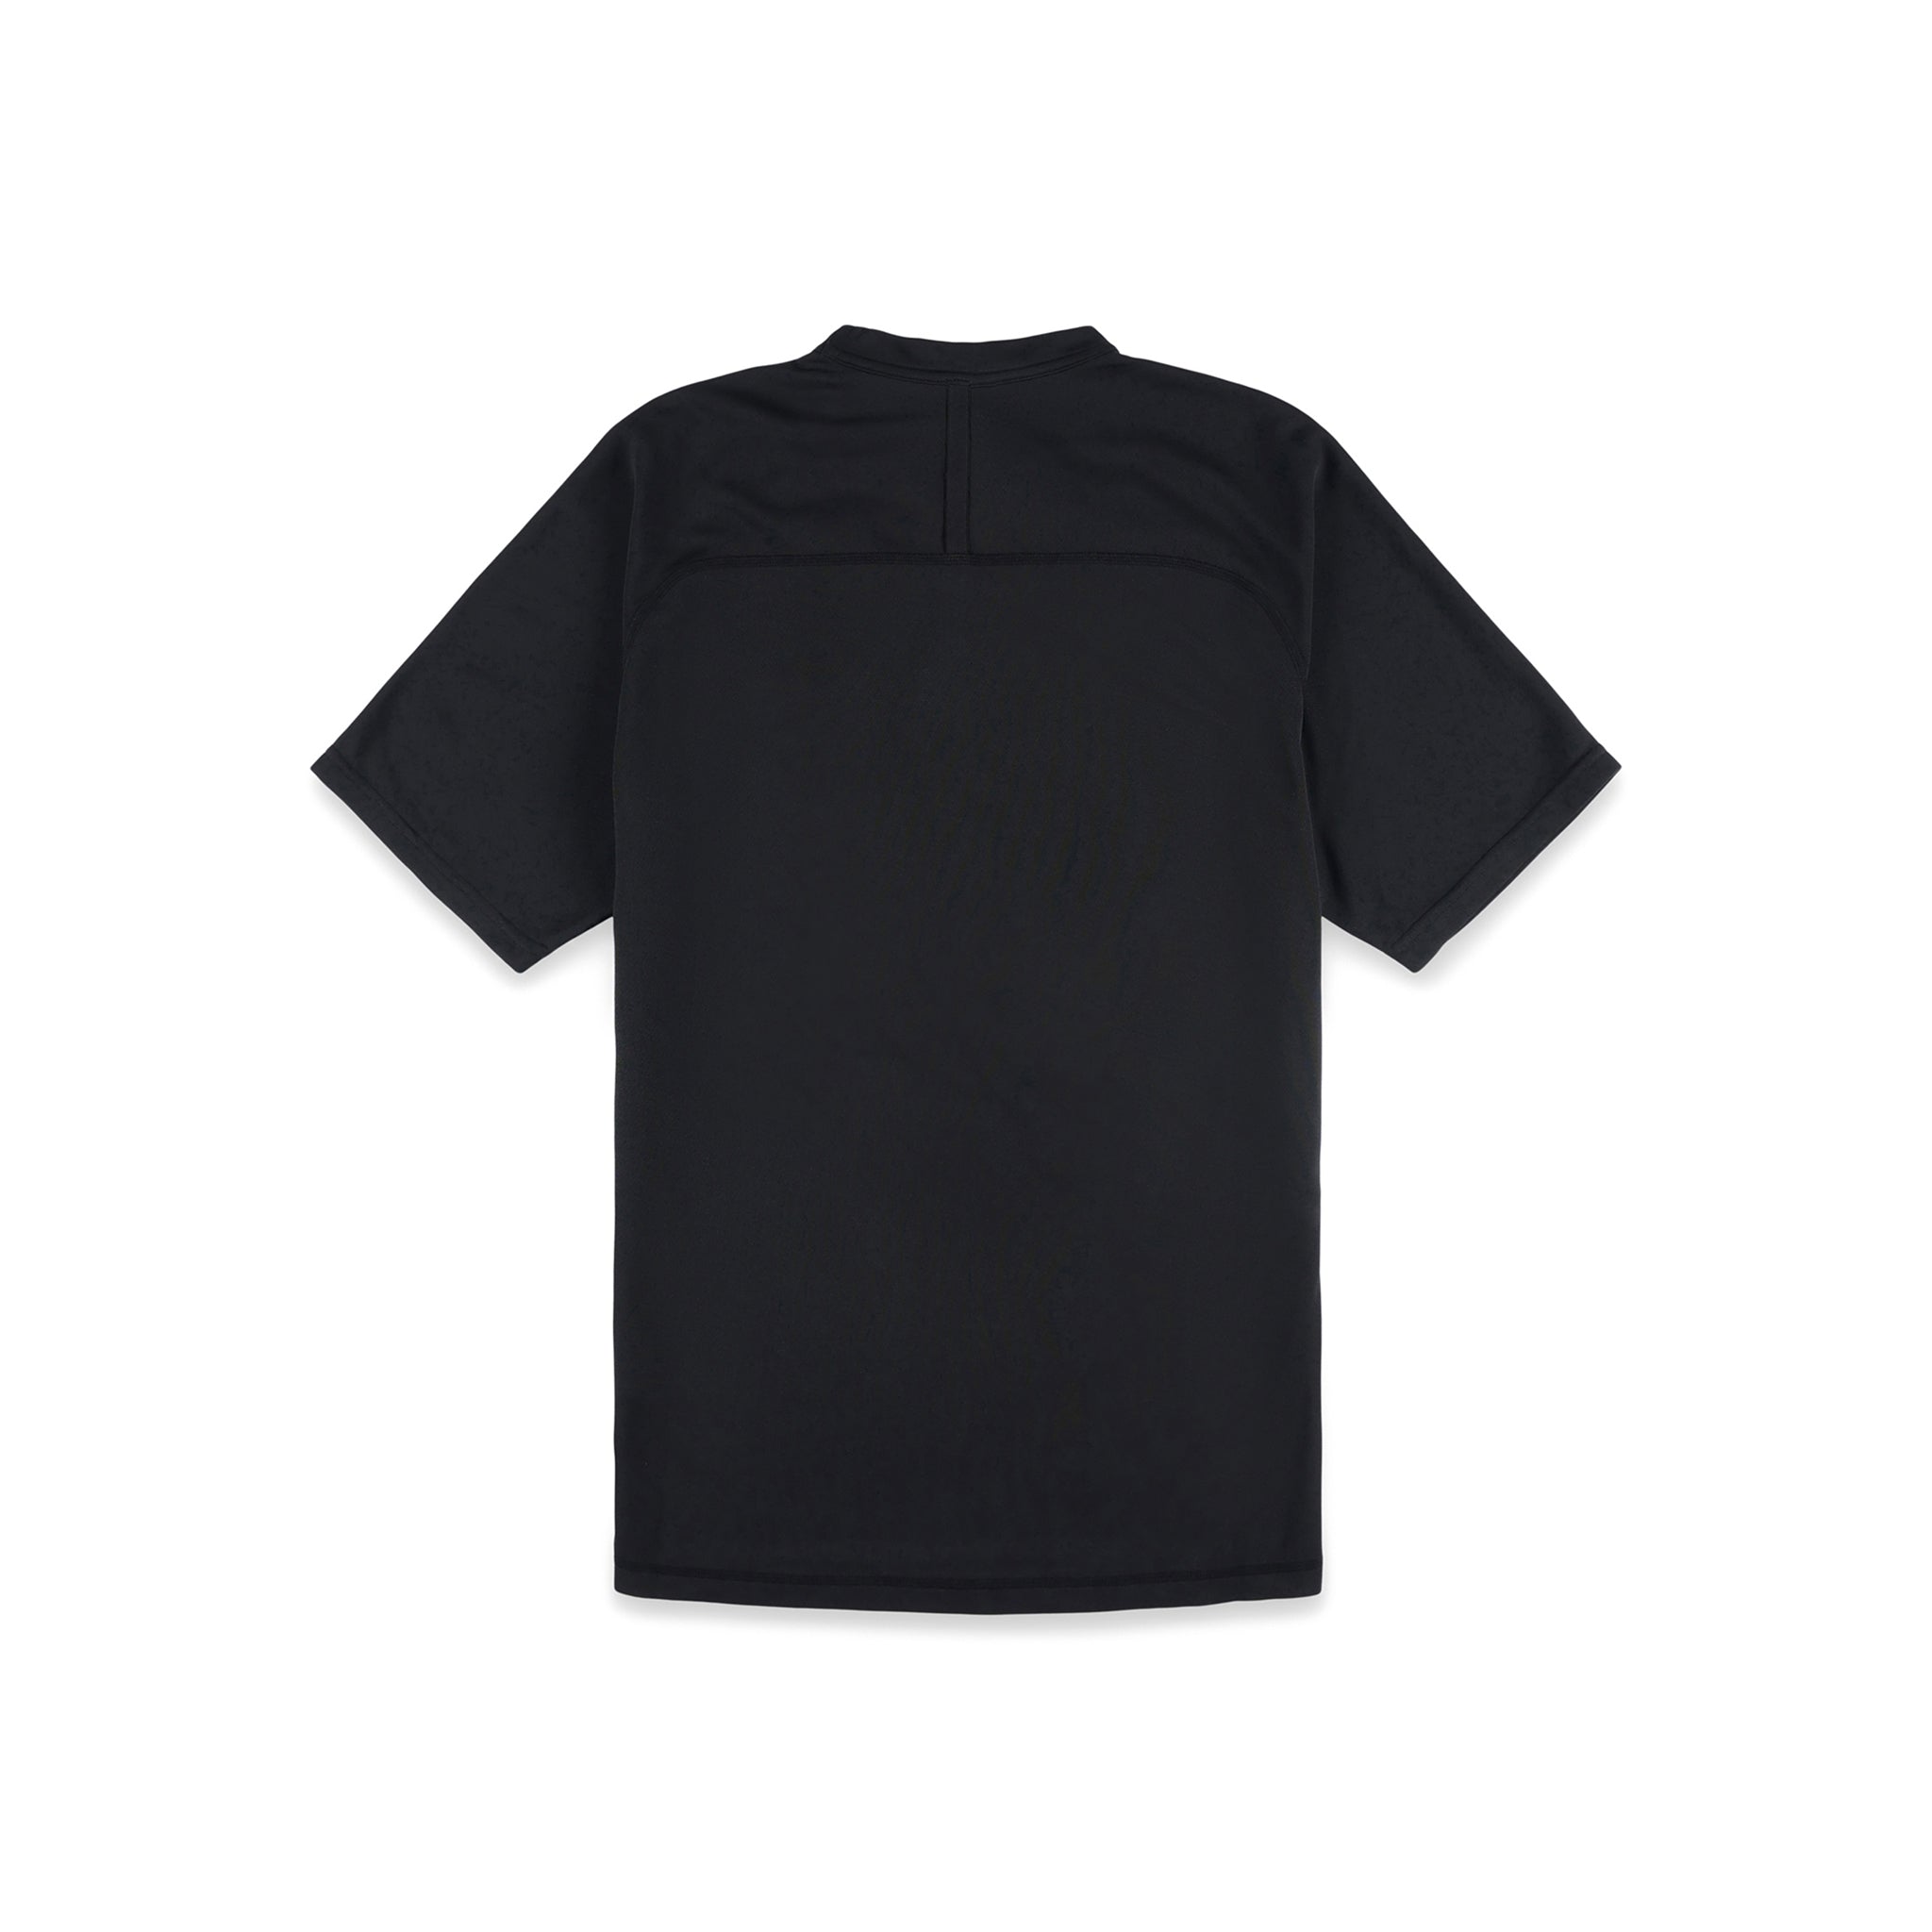 PackFast Packing Band on back of Topo Designs Men's River Tee Short Sleeve UPF 30+ moisture wicking t-shirt in "Black".